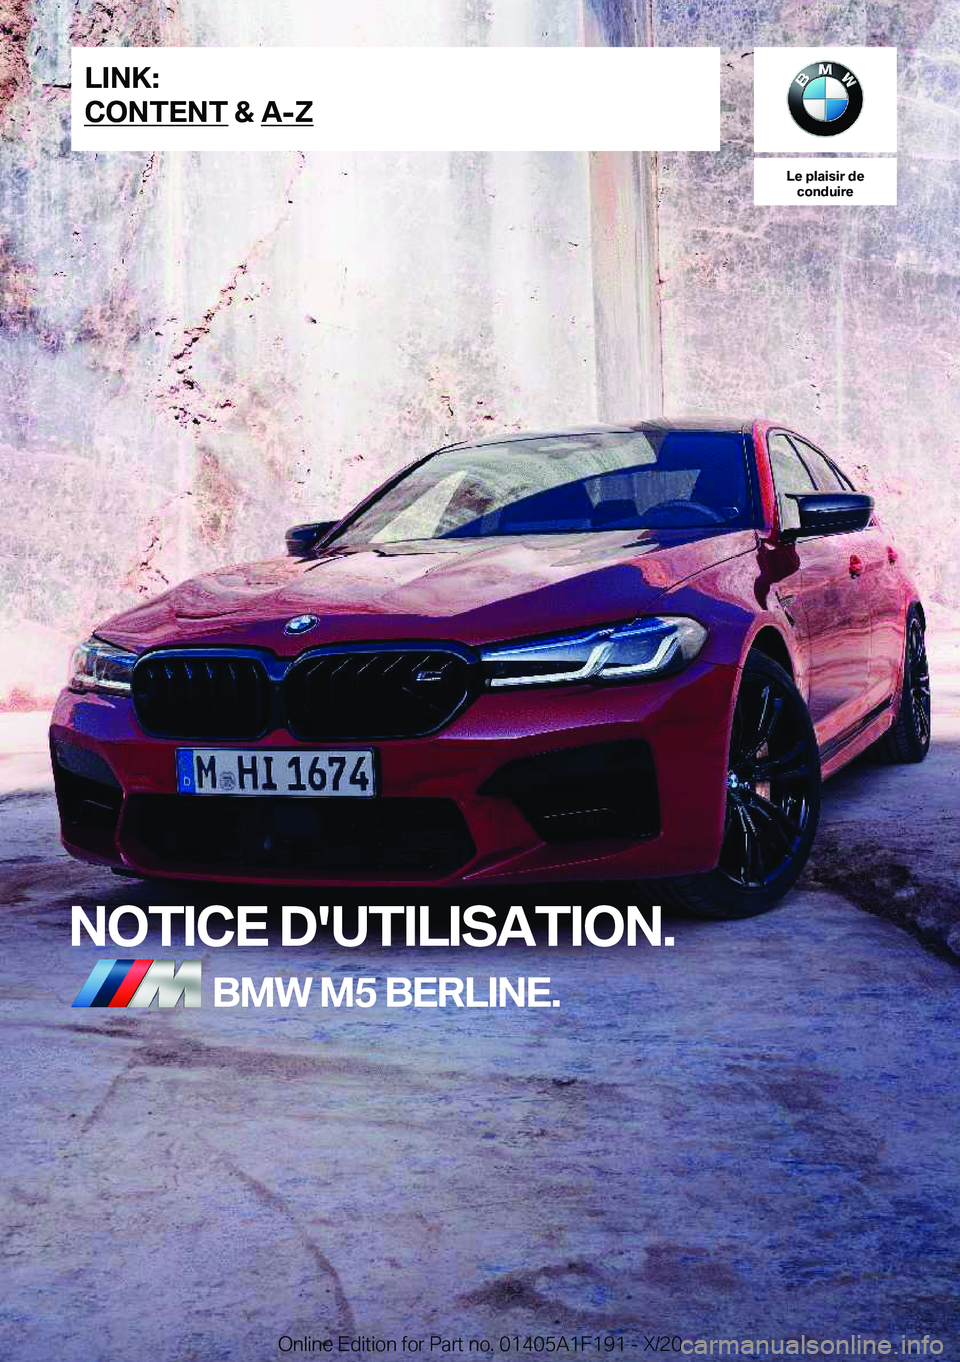 BMW M5 2021  Notices Demploi (in French) �L�e��p�l�a�i�s�i�r��d�e�c�o�n�d�u�i�r�e
�N�O�T�I�C�E��D�'�U�T�I�L�I�S�A�T�I�O�N�.�B�M�W��M�5��B�E�R�L�I�N�E�.�L�I�N�K�:
�C�O�N�T�E�N�T��&��A�-�Z�O�n�l�i�n�e��E�d�i�t�i�o�n��f�o�r��P�a�r